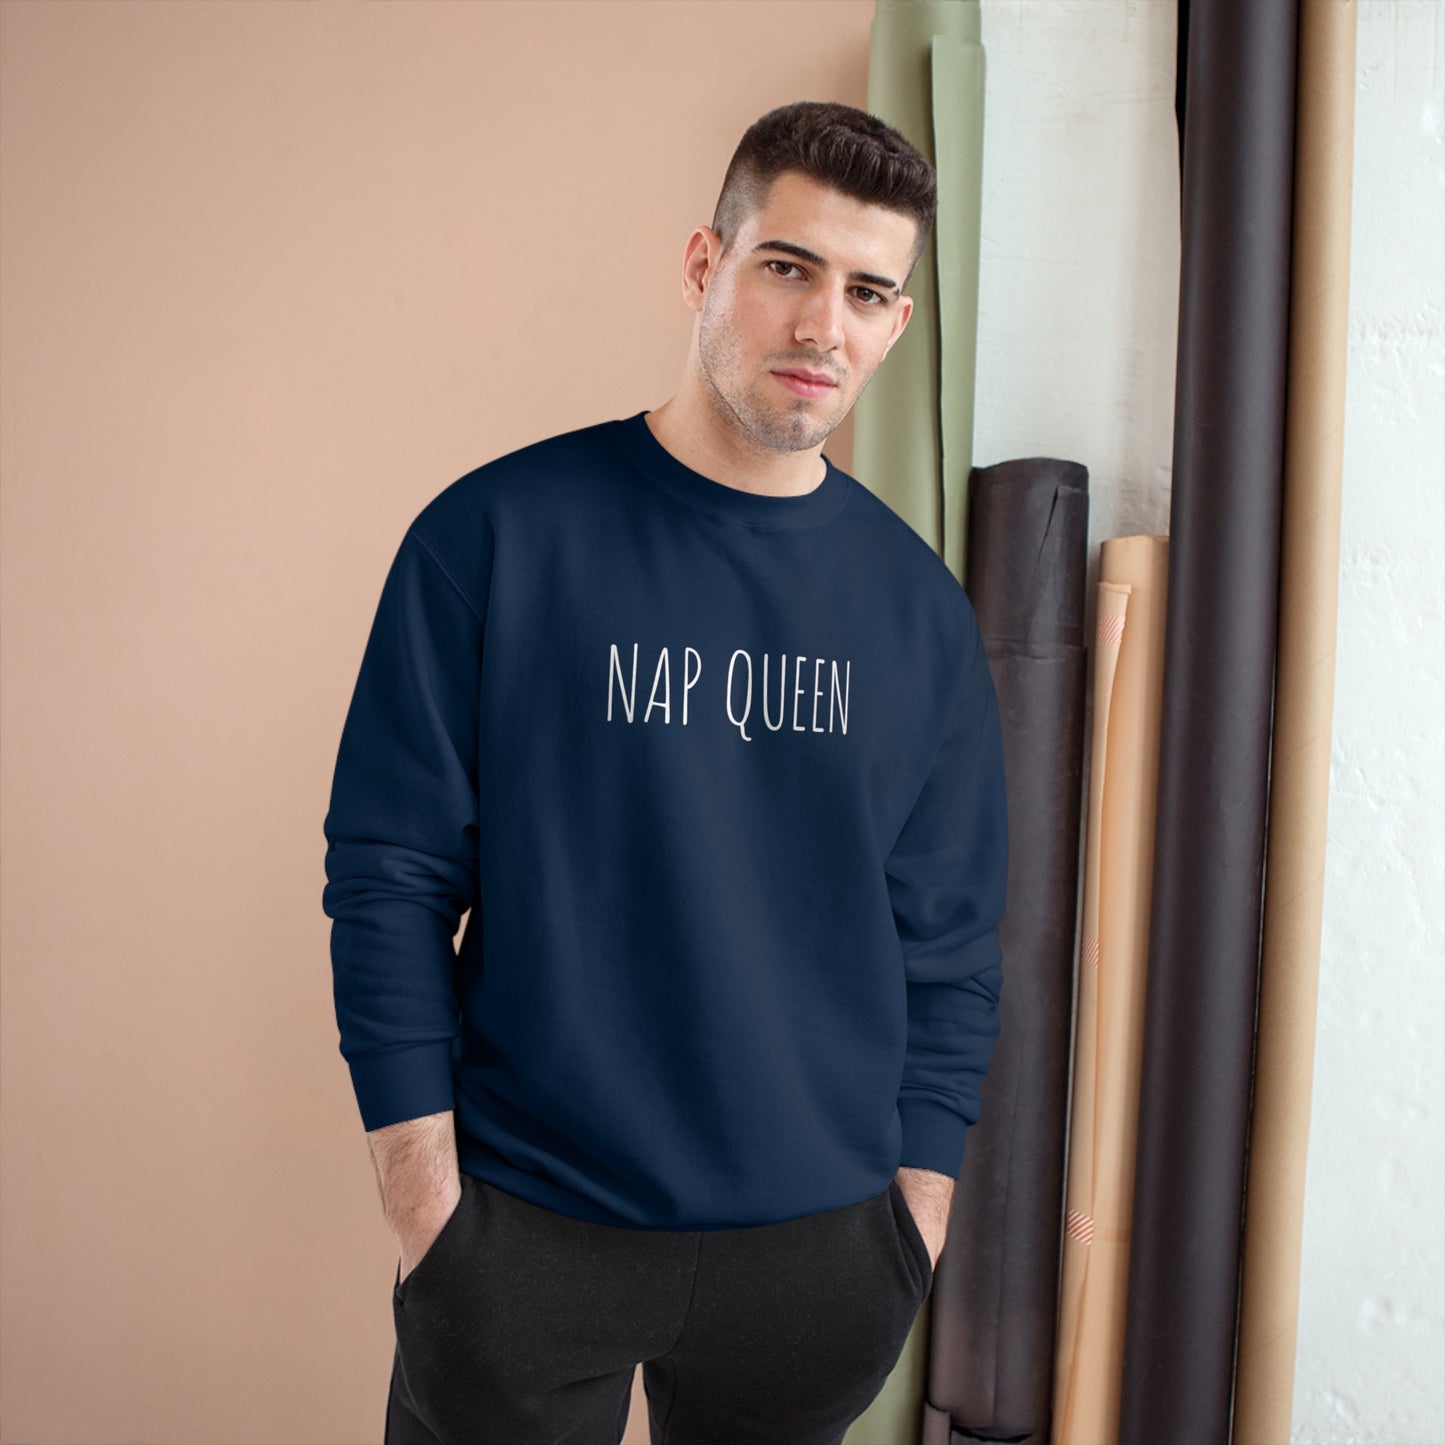 NAP QUEEN - Champion Eco Crewneck Sweatshirt: Stylish Comfort with Recycled Polyester Blend